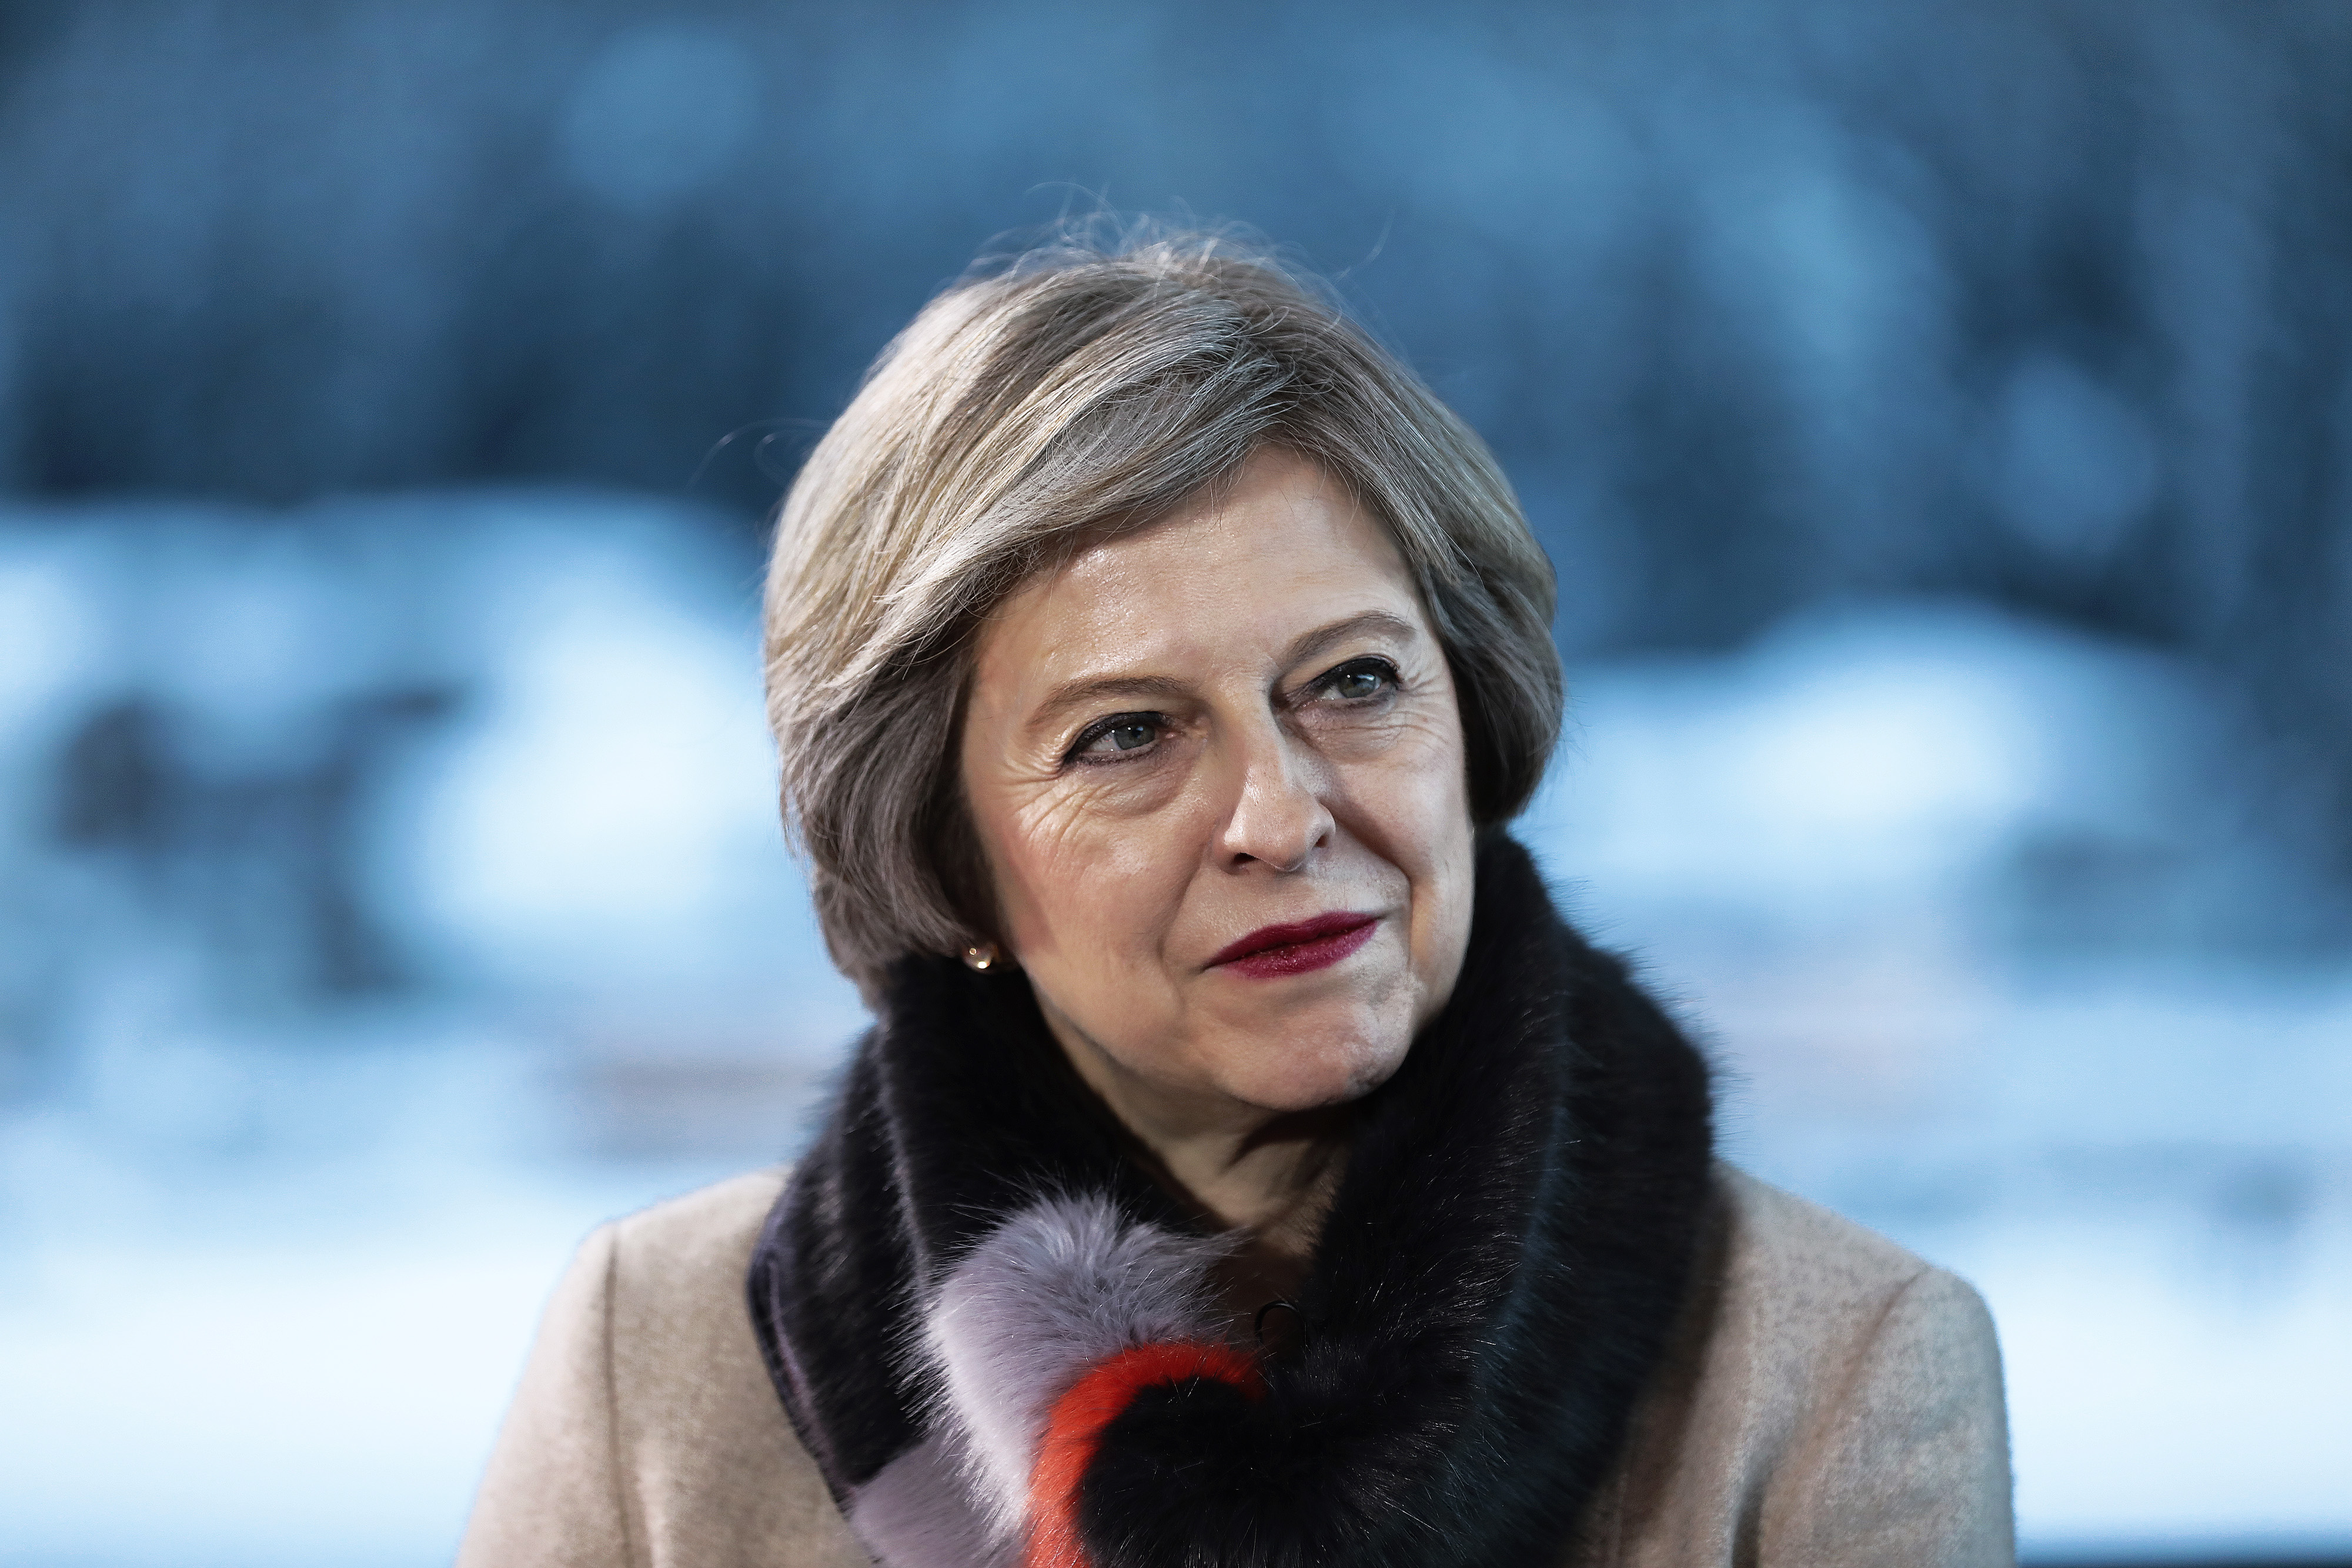 Theresa May, U.K. prime minister, looks on during a Bloomberg Television interview at the World Economic Forum (WEF) in Davos, Switzerland, on Thursday, Jan. 19, 2017. (Simon Dawson/Bloomberg—via Getty Images)